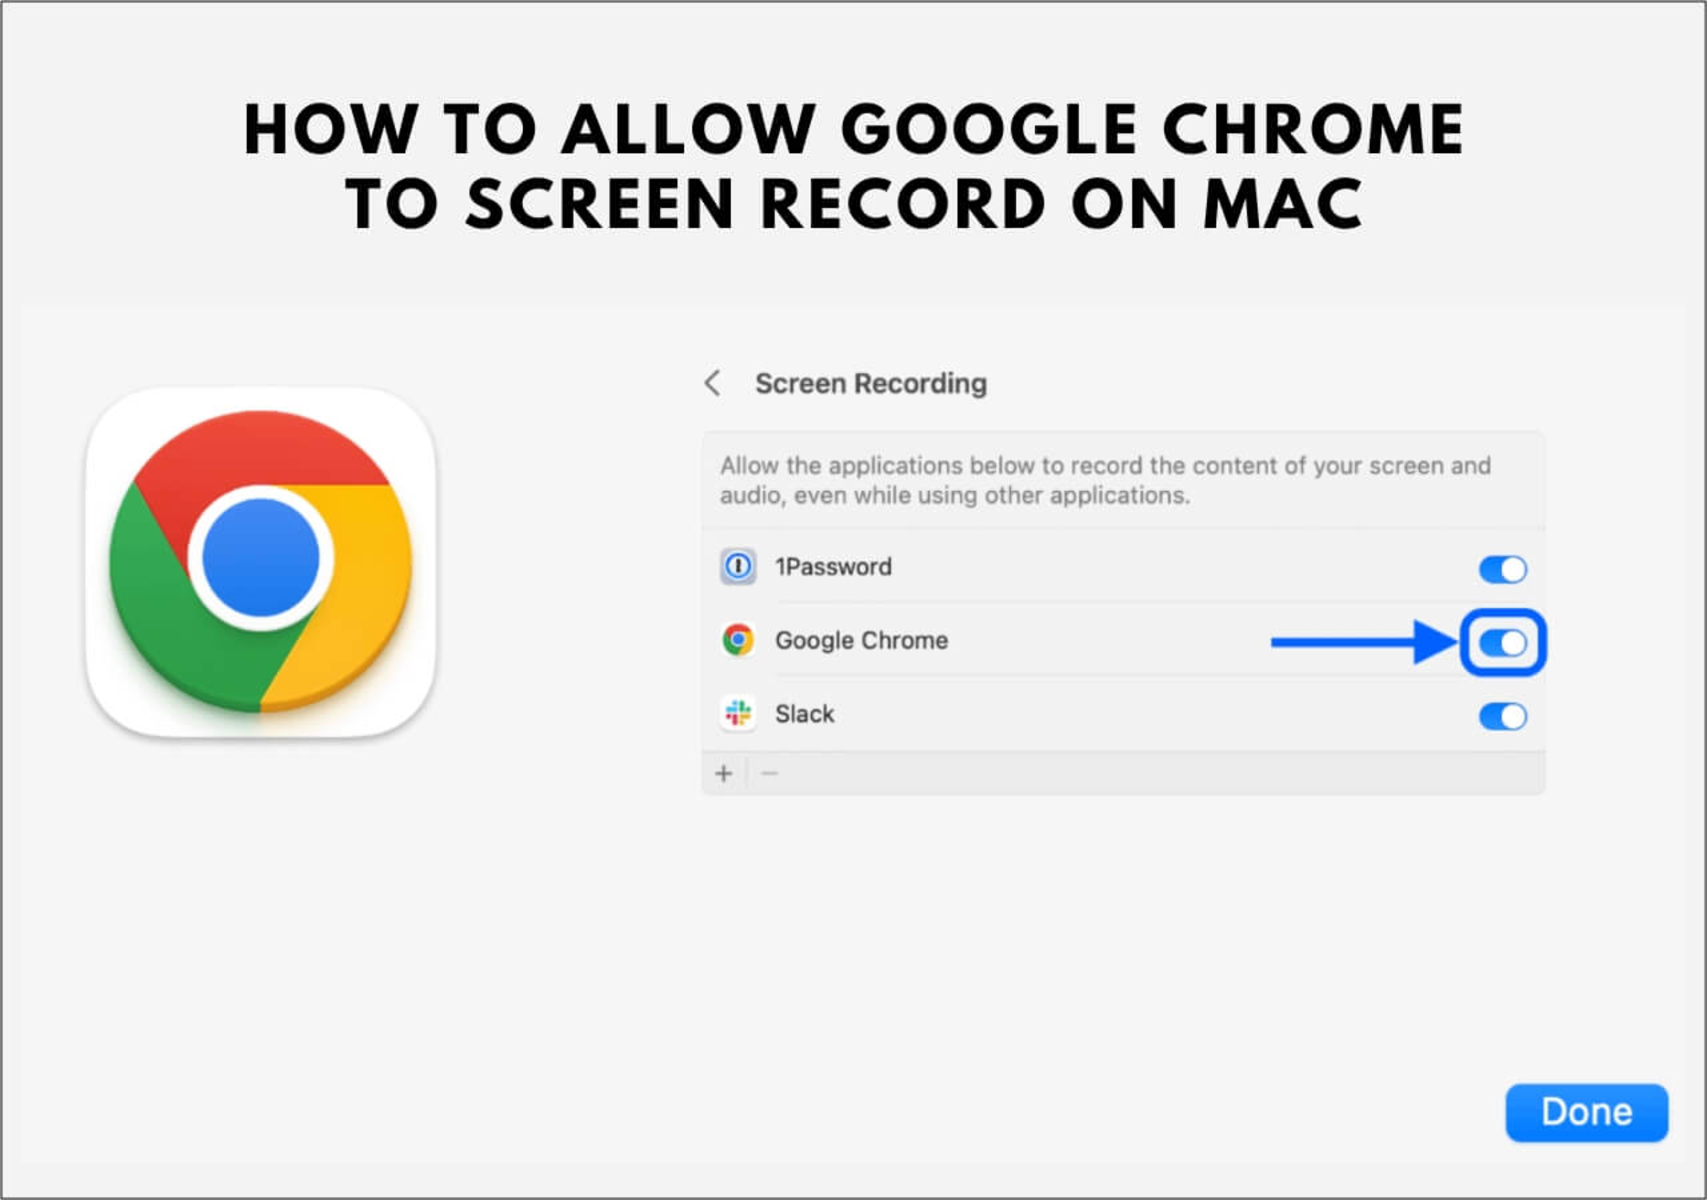 How To Add Google Chrome To Screen Recording On Mac